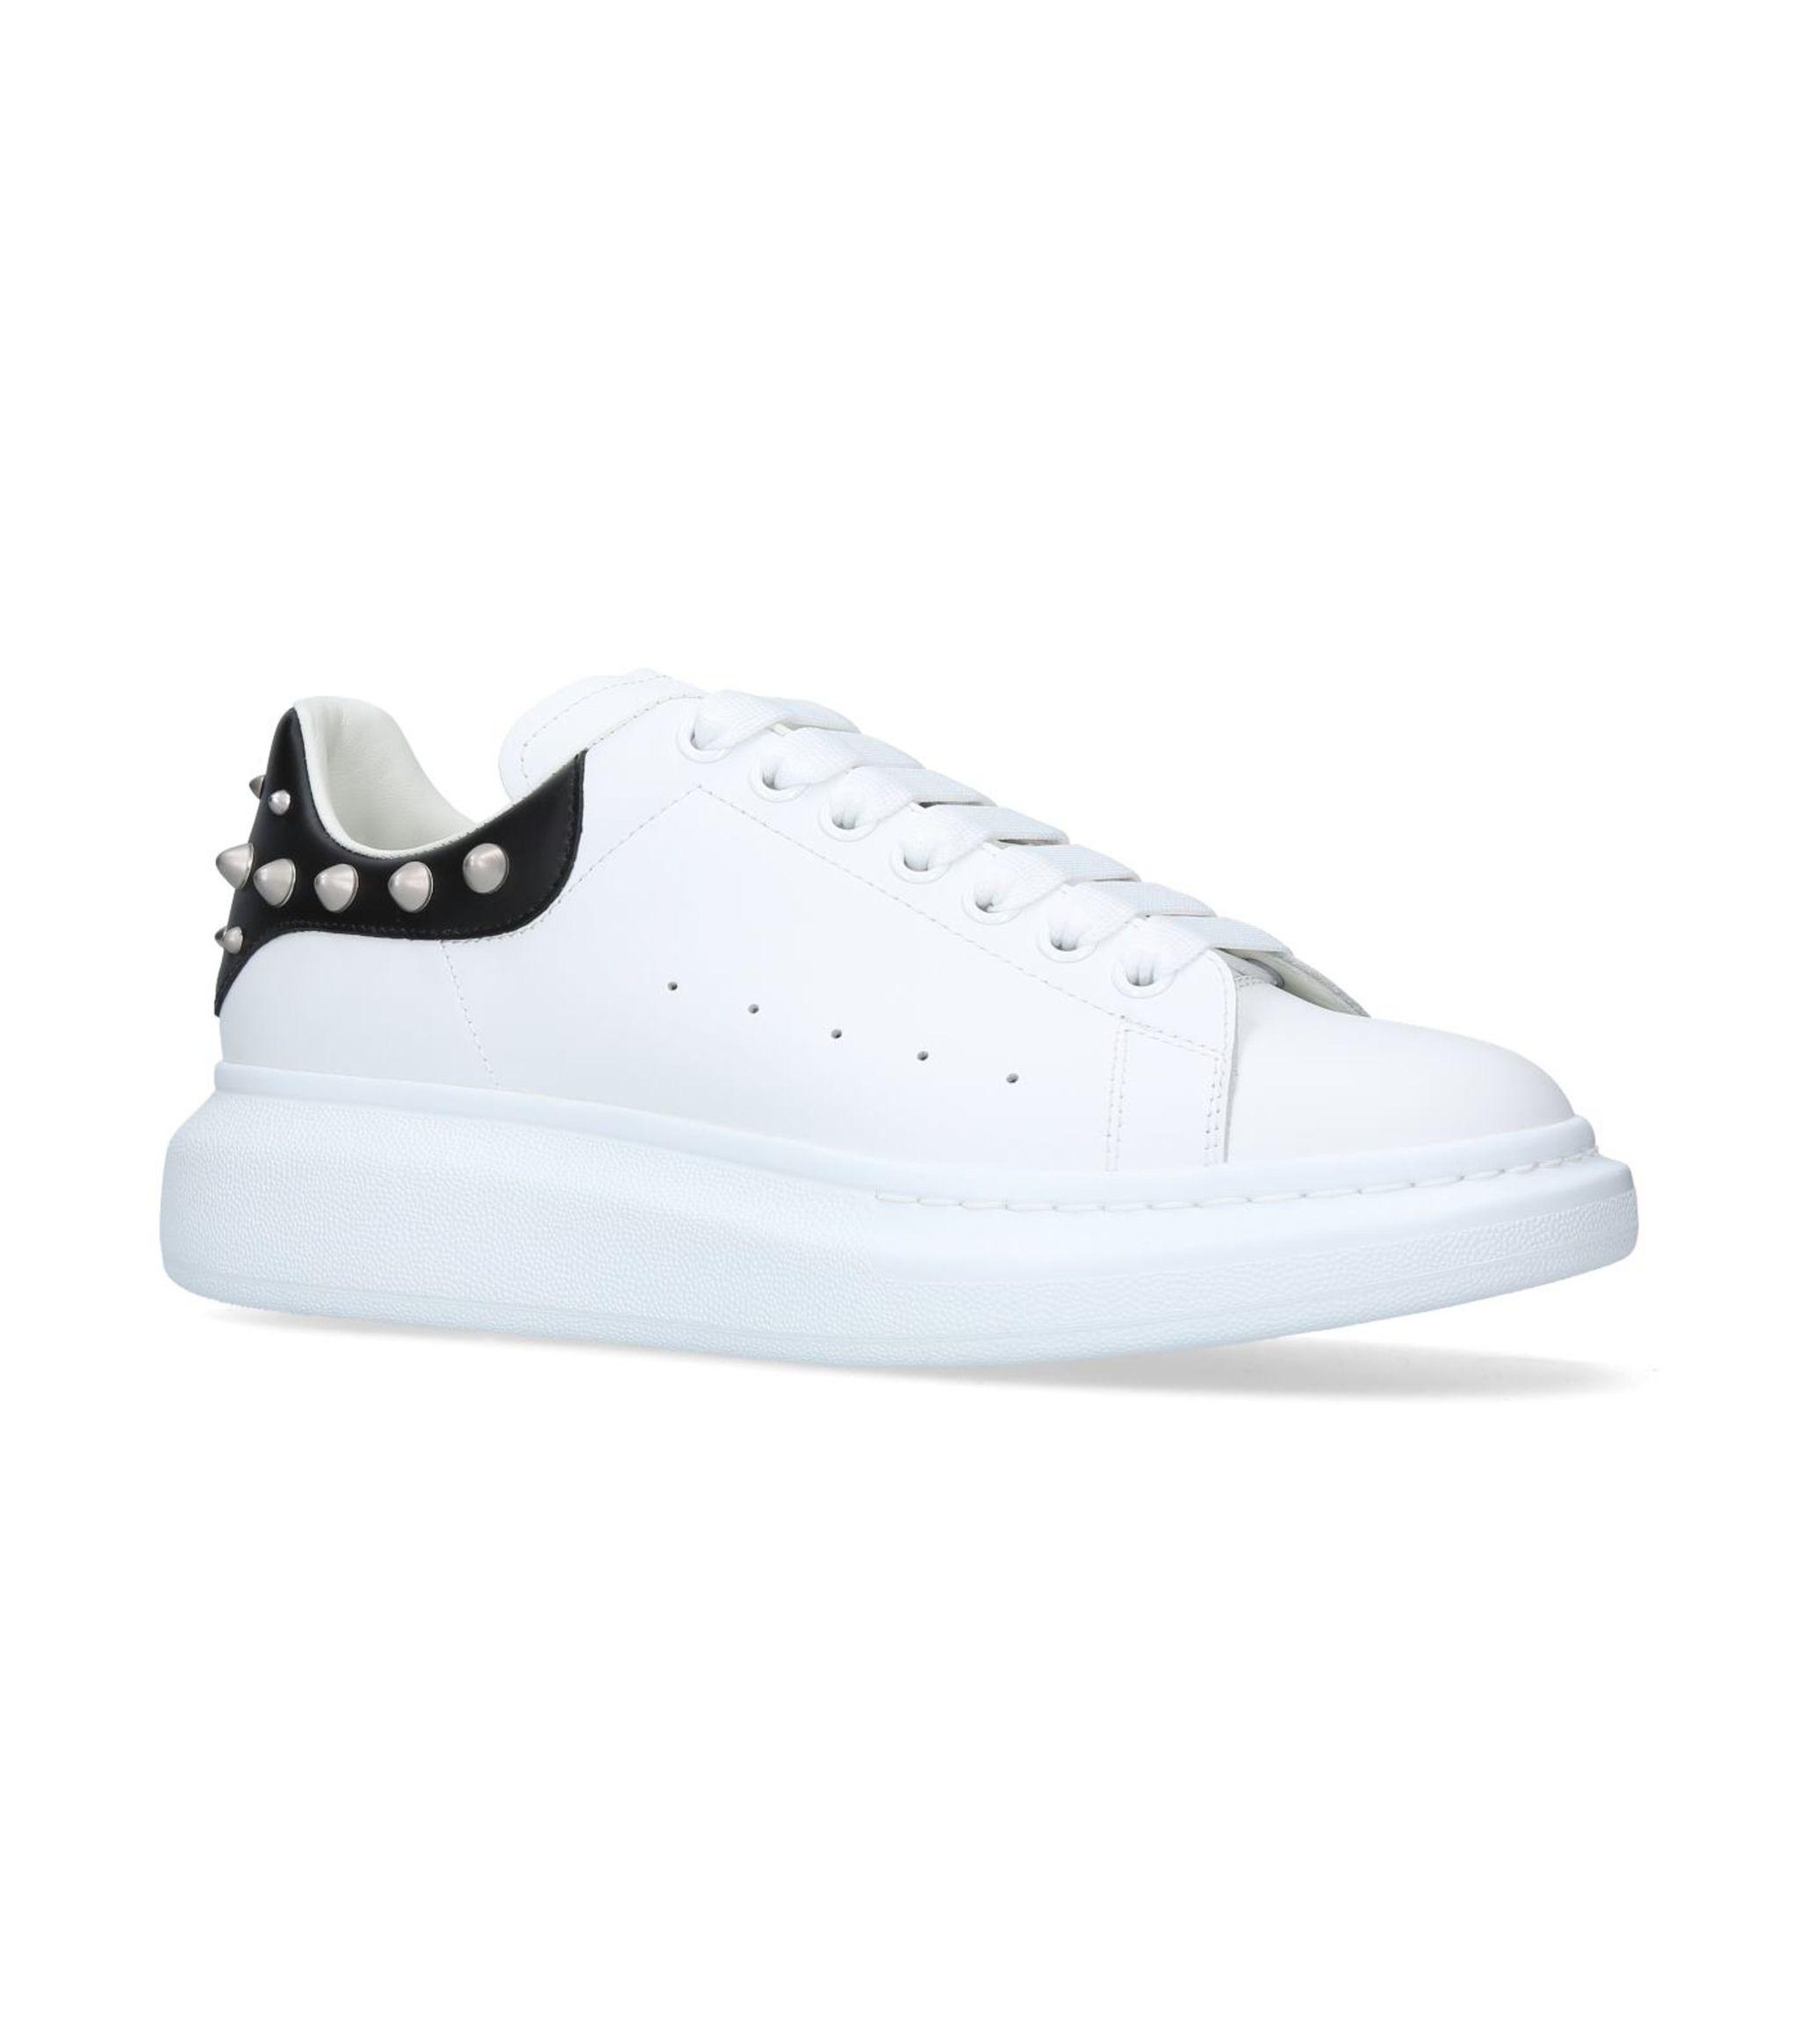 Alexander McQueen Leather Studded Heel Show Sneakers in White for Men ...